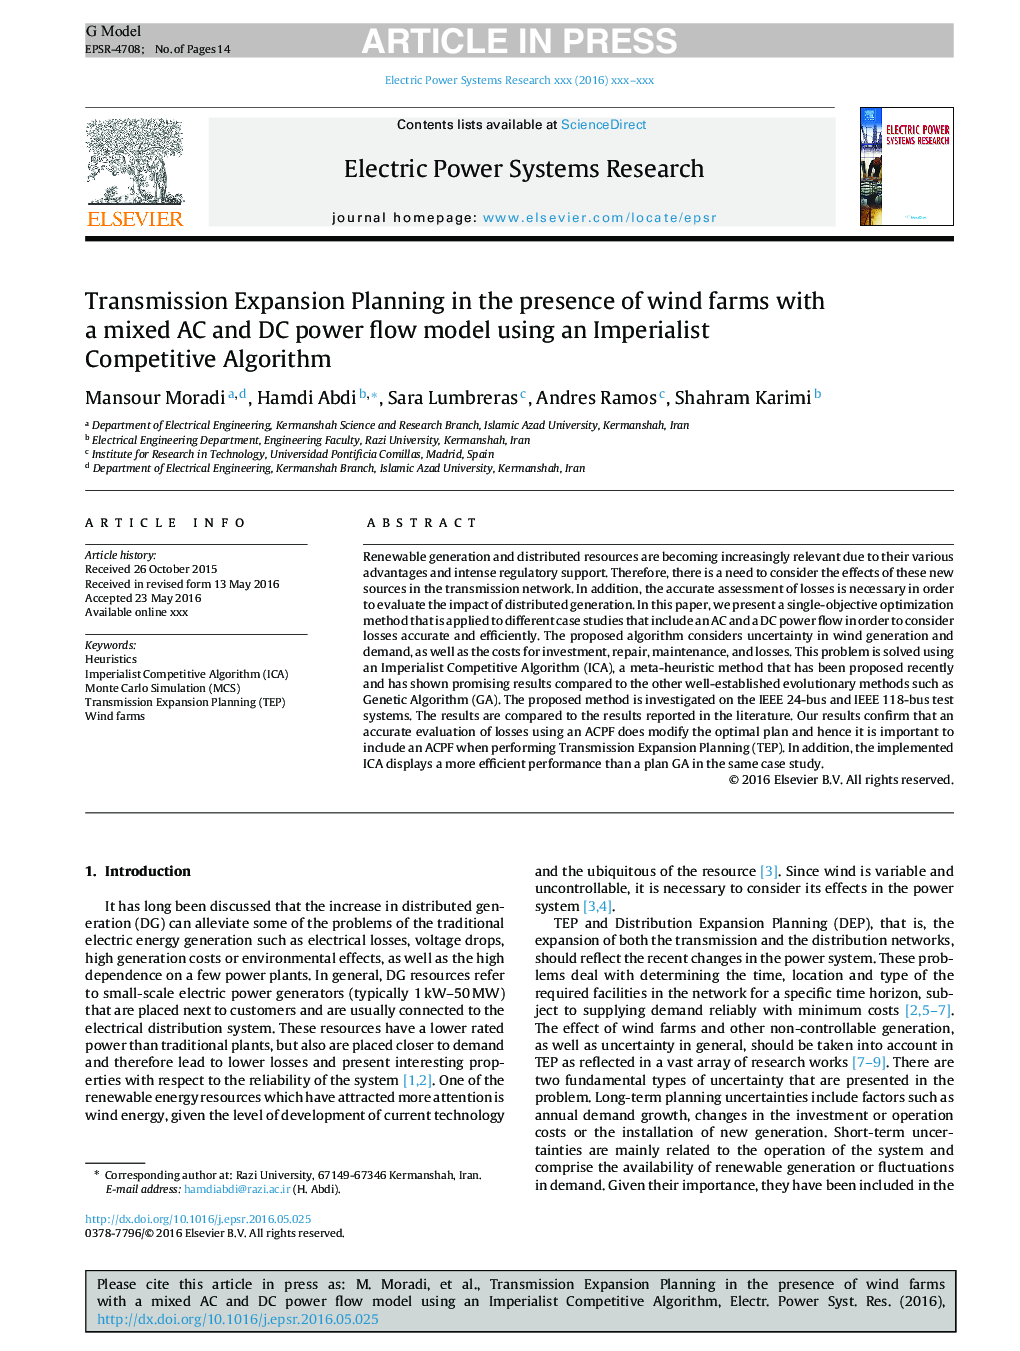 Transmission Expansion Planning in the presence of wind farms with a mixed AC and DC power flow model using an Imperialist Competitive Algorithm